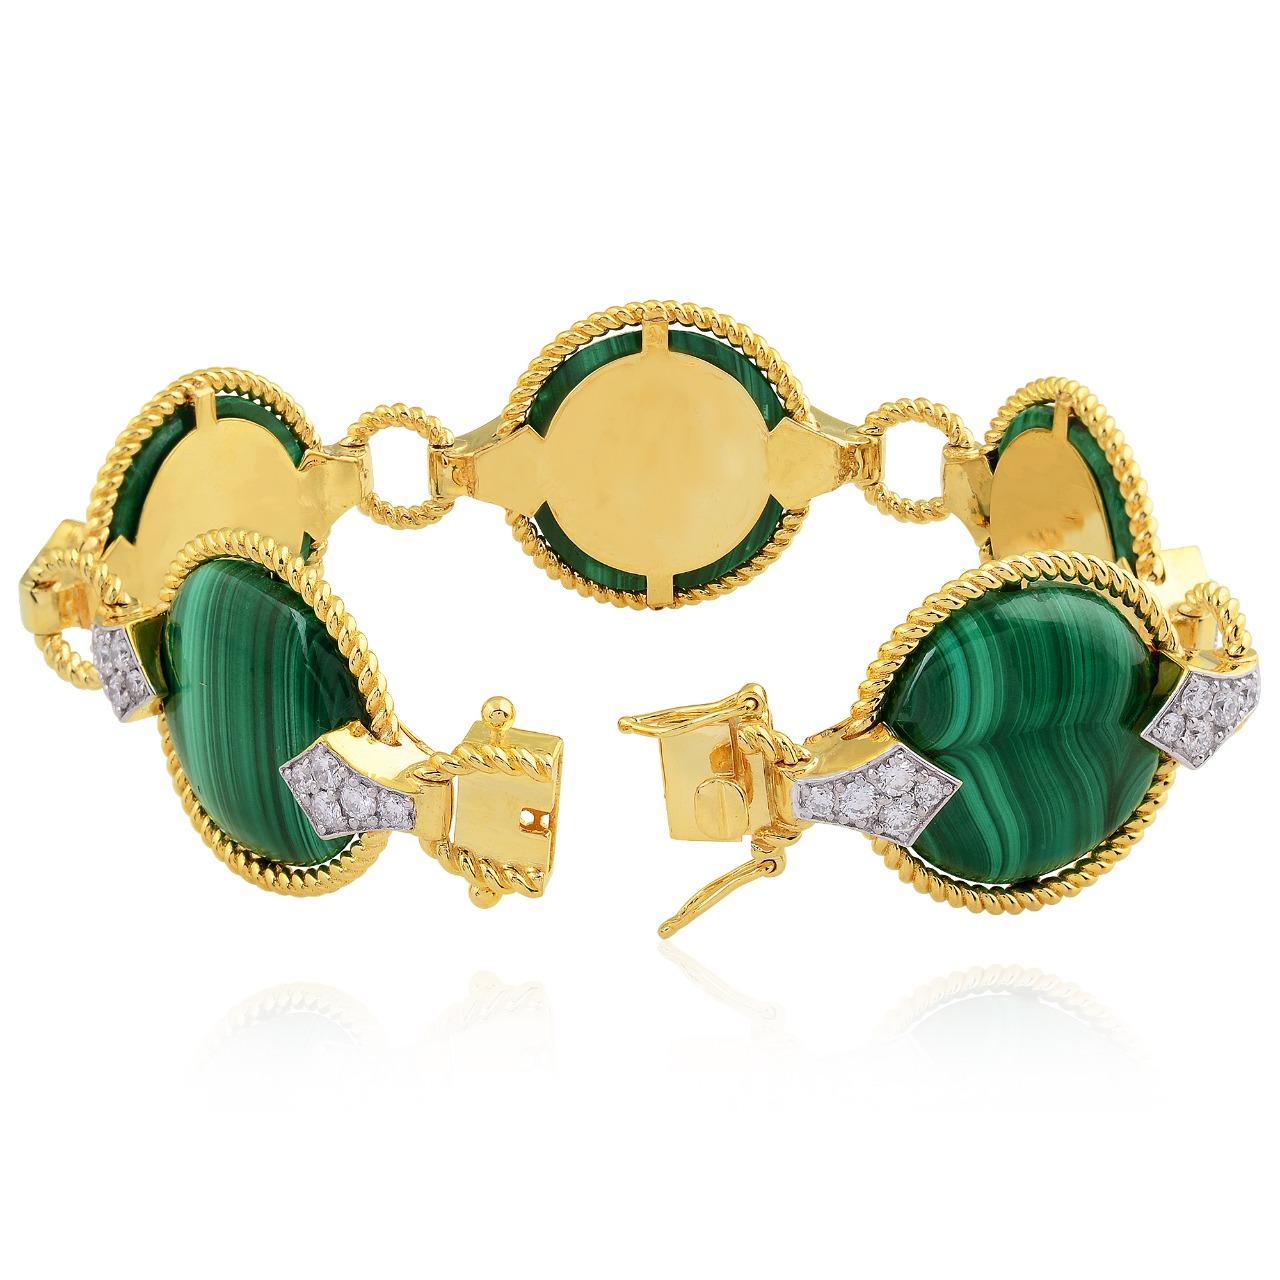 Cast from 14K gold and sterling silver. This beautiful bracelet is crafted with 86.14 carats malachite, and 2.25 carats diamonds. Clasp closure.

FOLLOW  MEGHNA JEWELS storefront to view the latest collection & exclusive pieces.  Meghna Jewels is